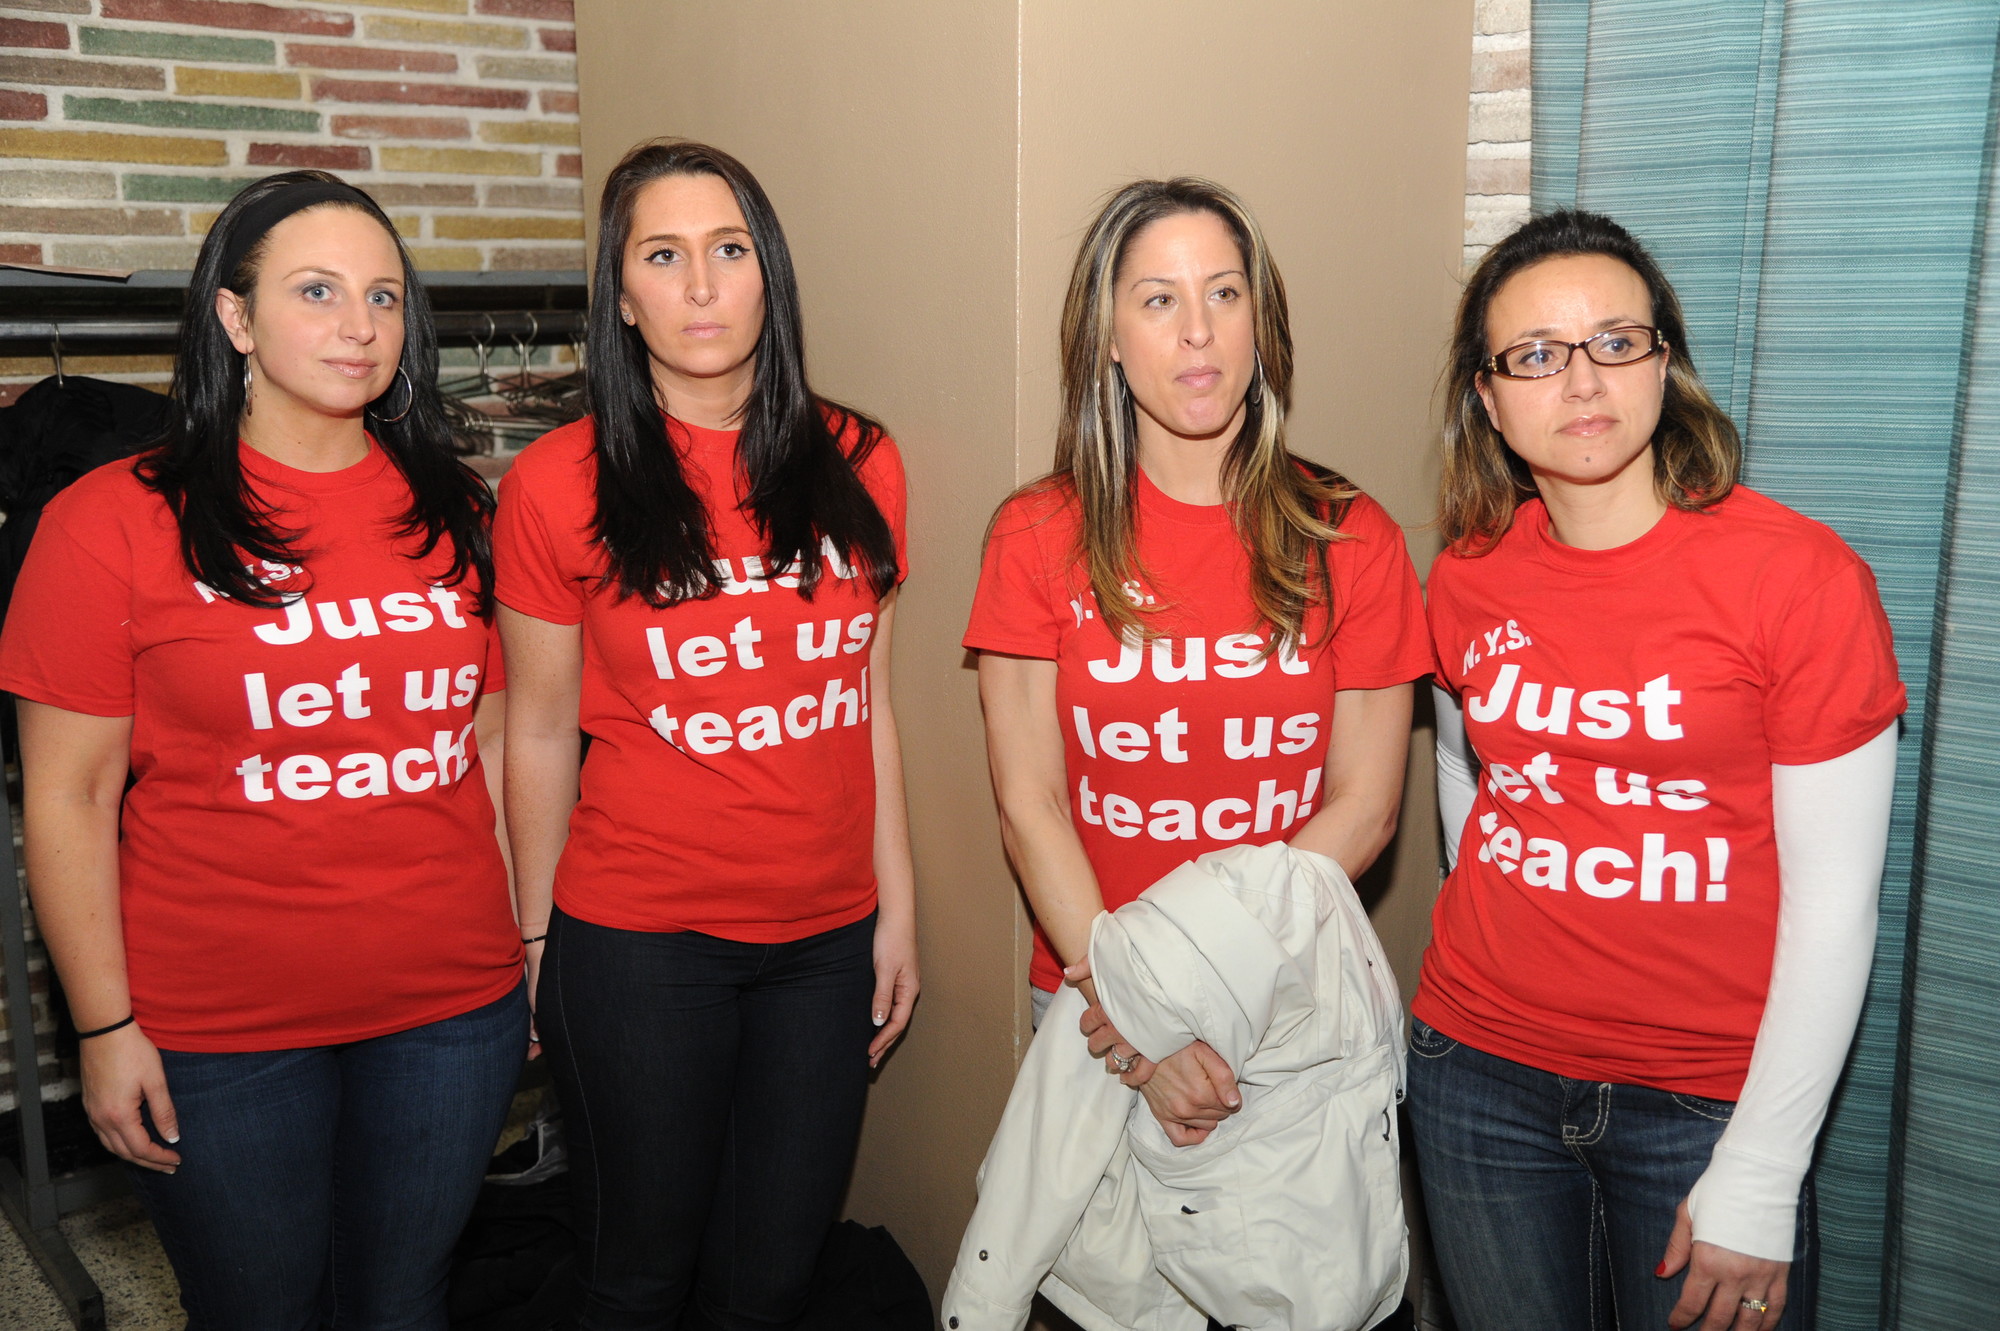 Area teachers, from left, Melissa Cangelosi, Lauren Funaro, Dani Iadevaia Andria Karousis showed their feelings about the Common Core tests at an education forum at Levittown Hall in Hicksville on March 16.